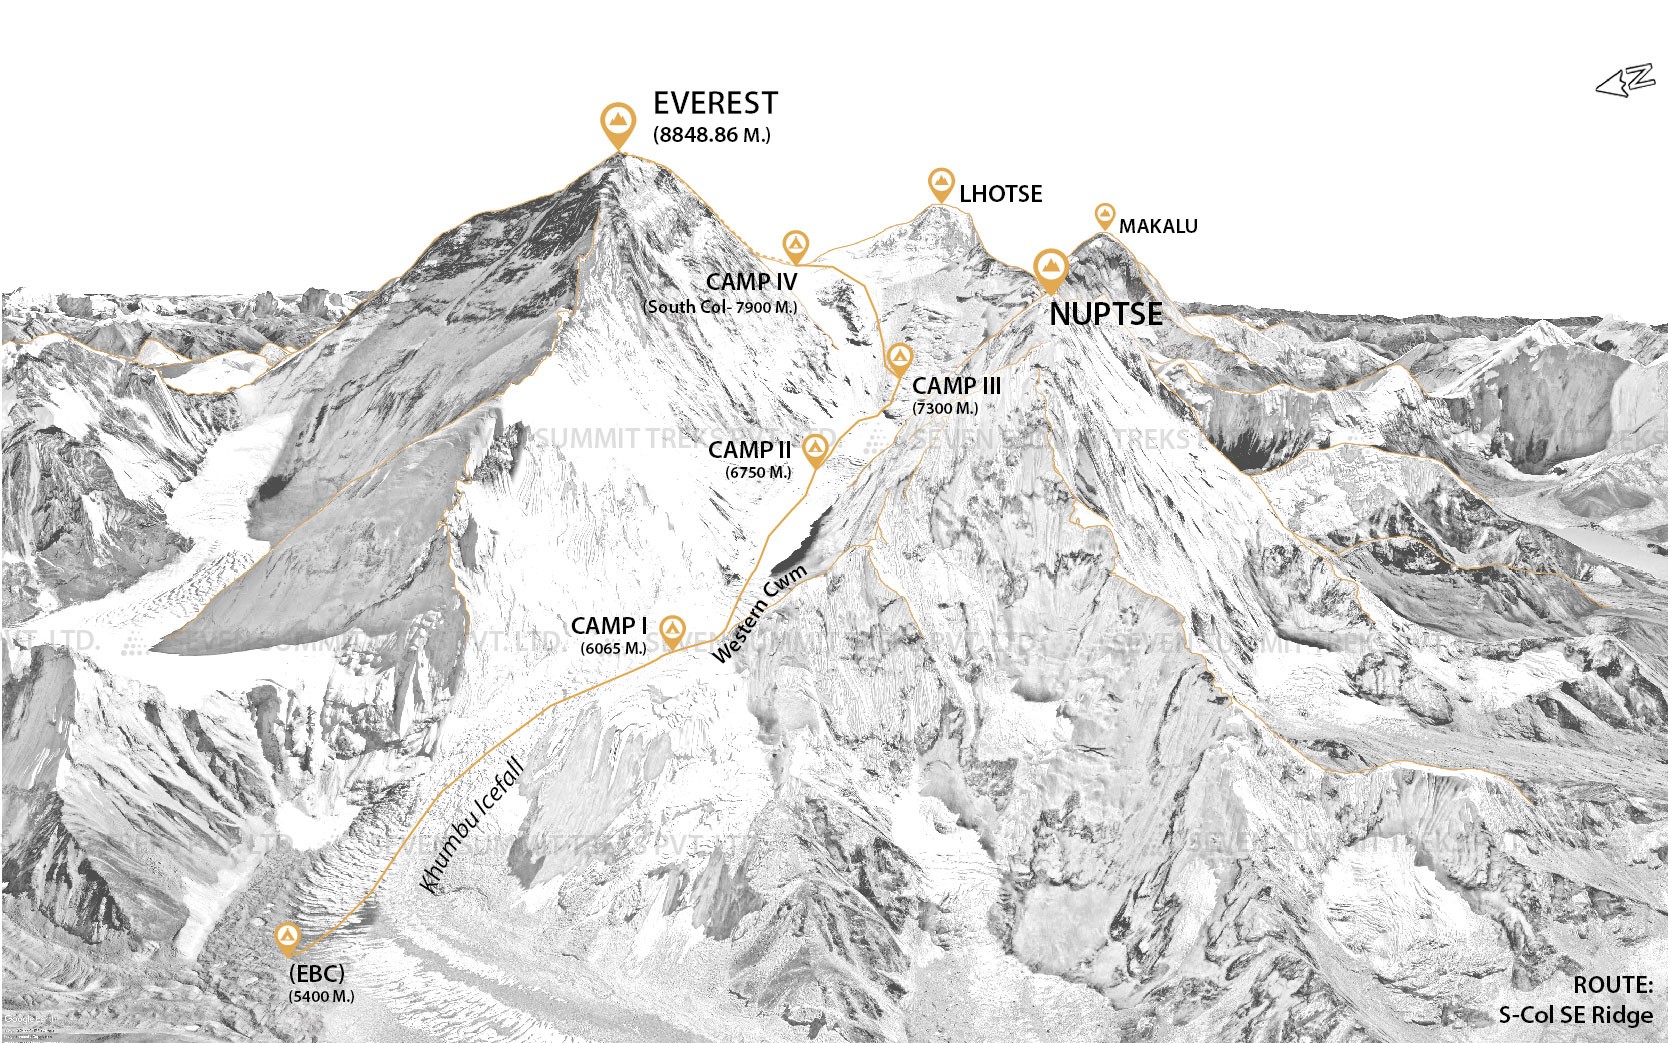 VIP EVEREST EXPEDITION (8848.86M)